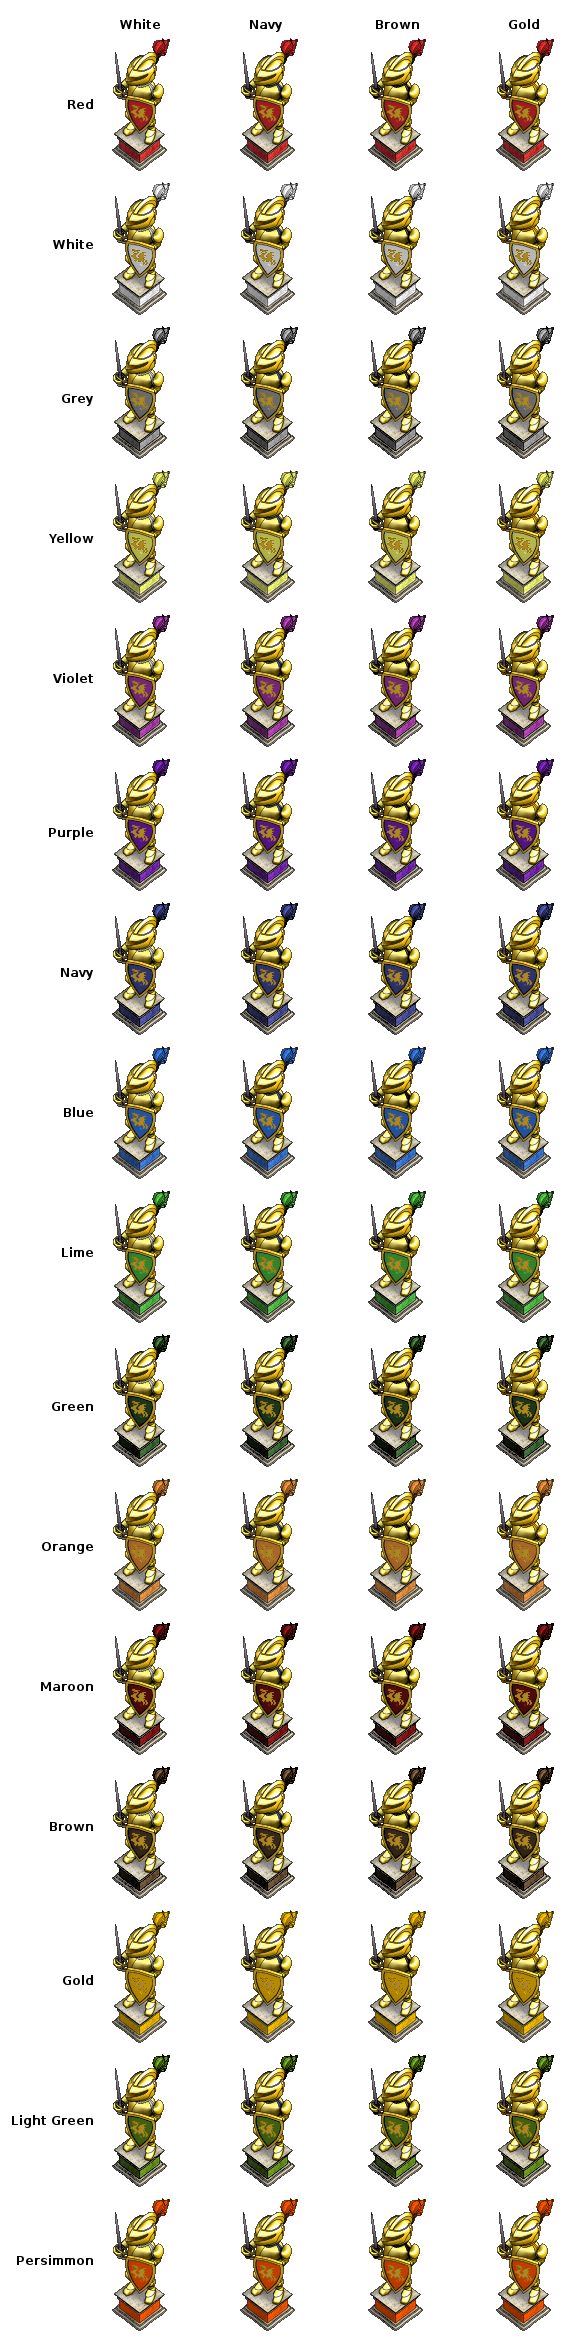 Colors-furniture-Gilded armor with sword.png